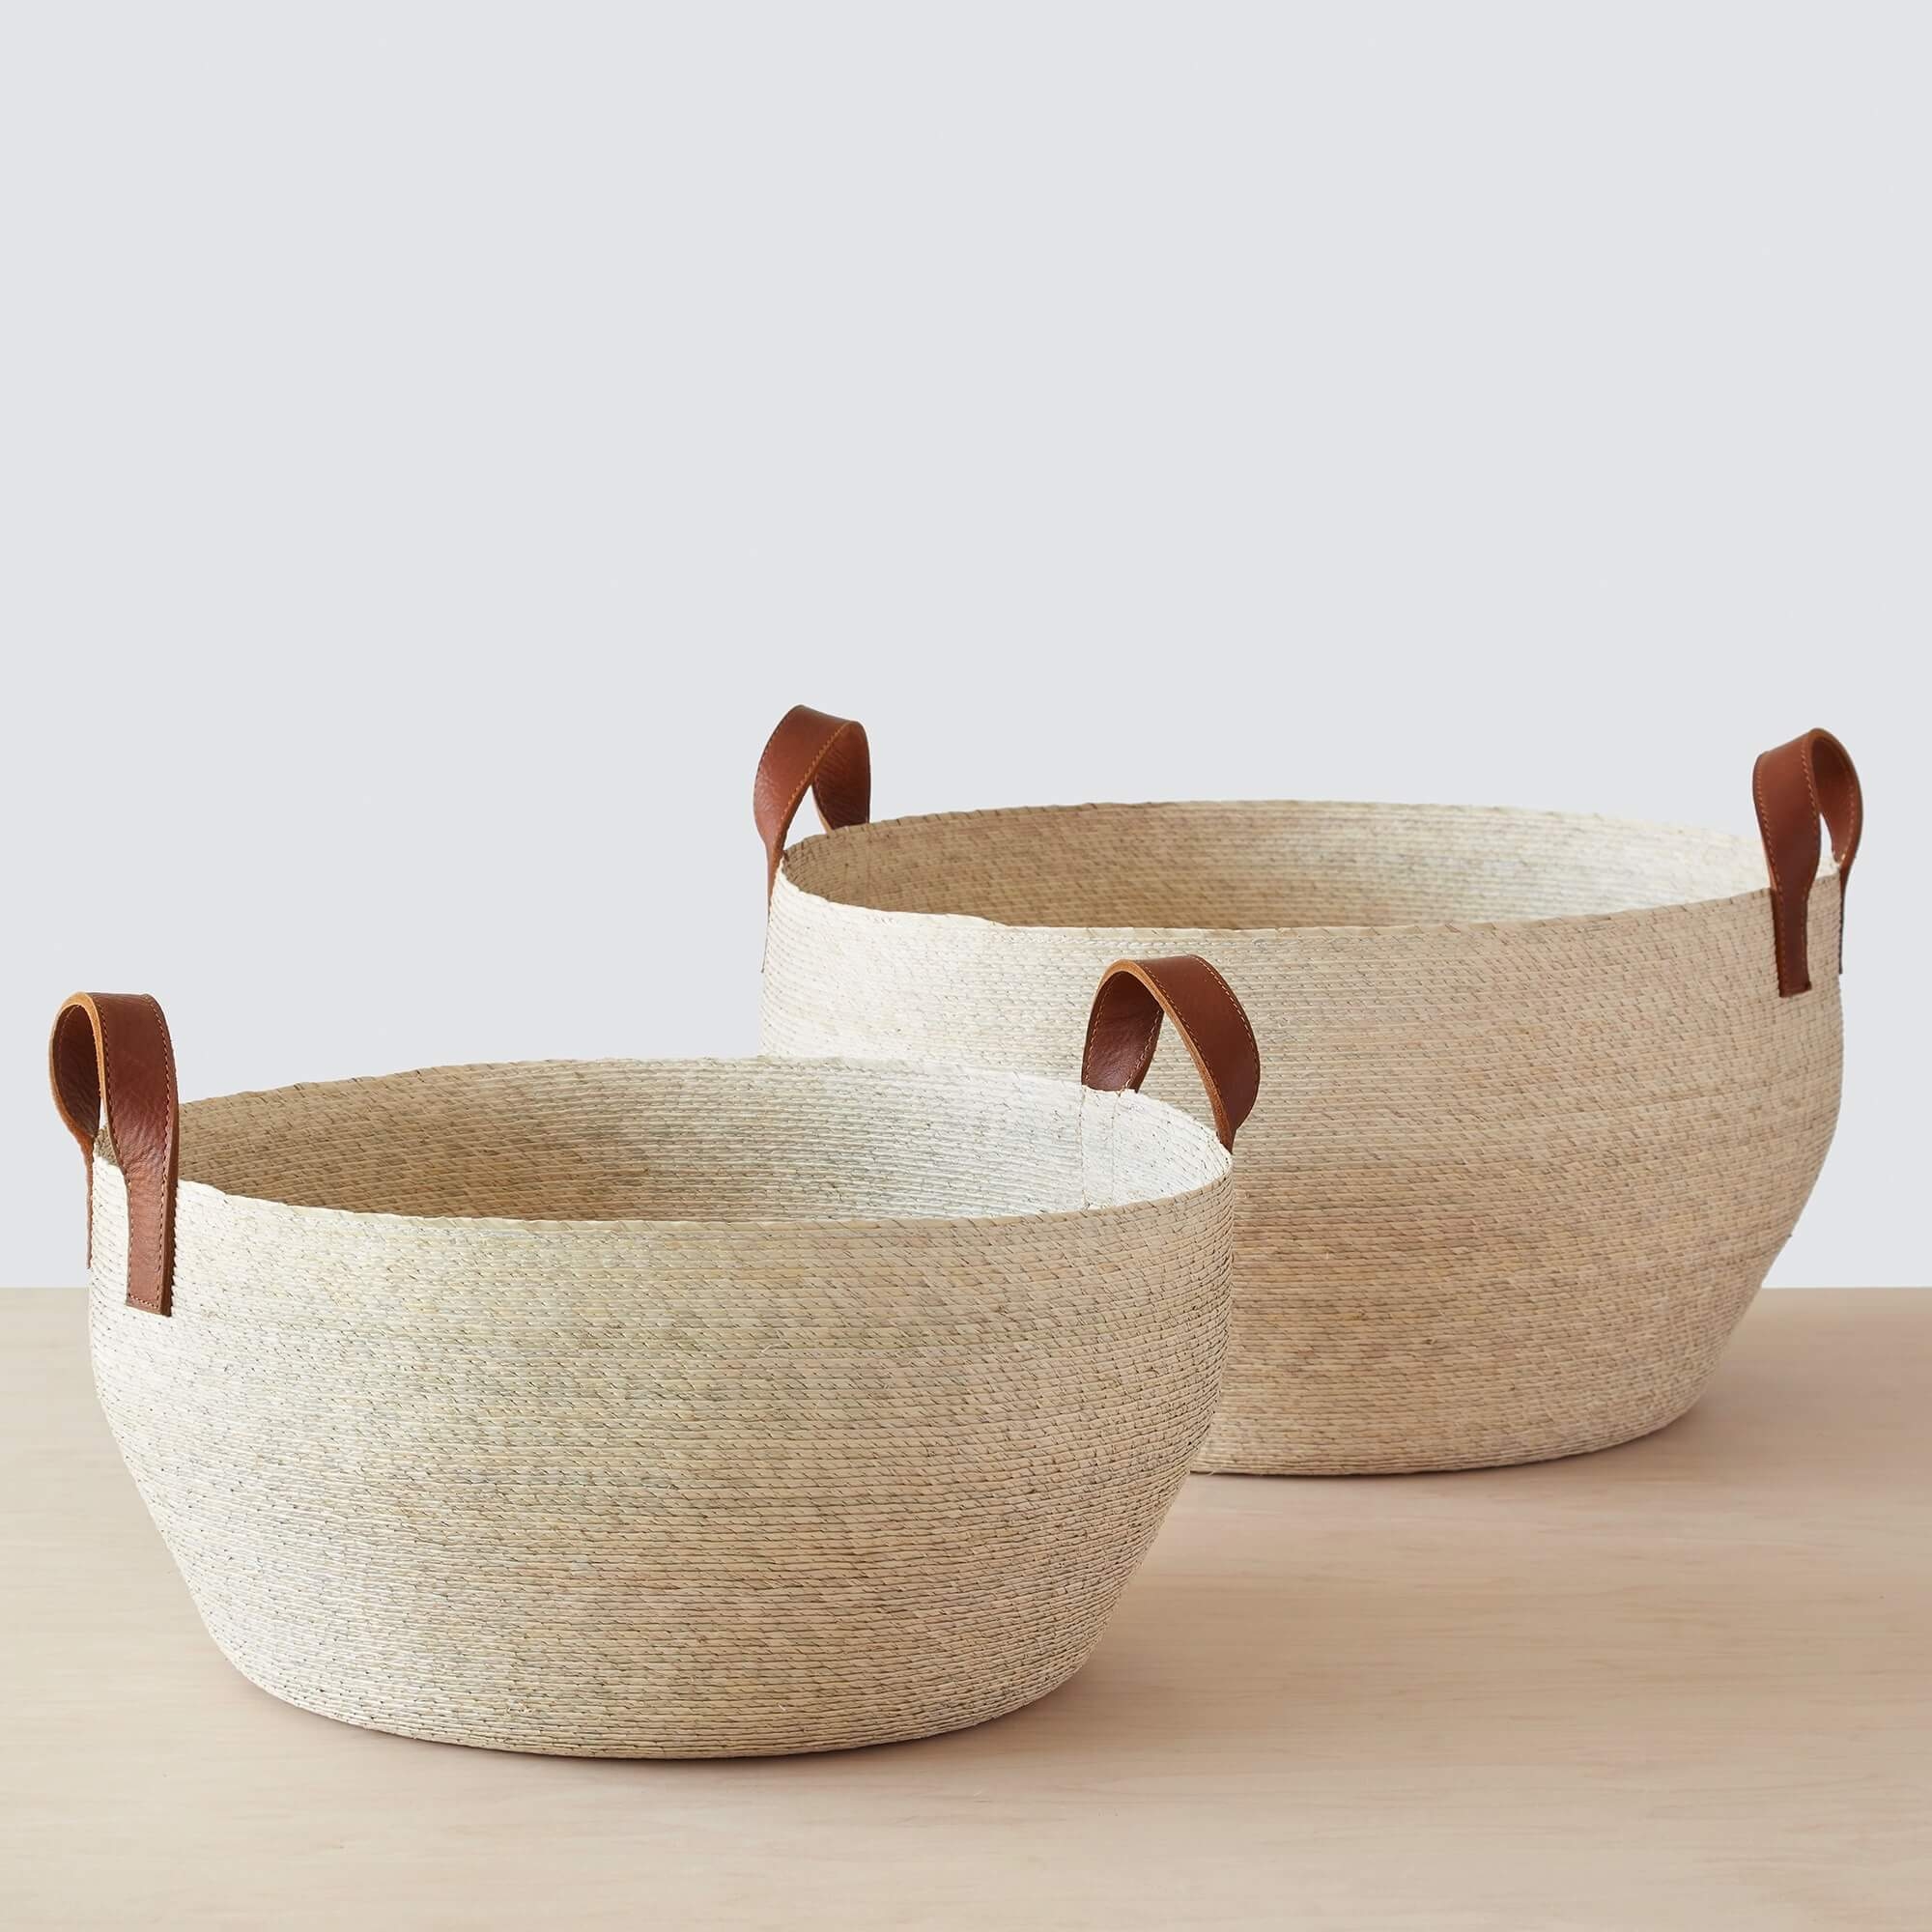 The Citizenry Mercado Floor Baskets | Large | Natural - Image 1